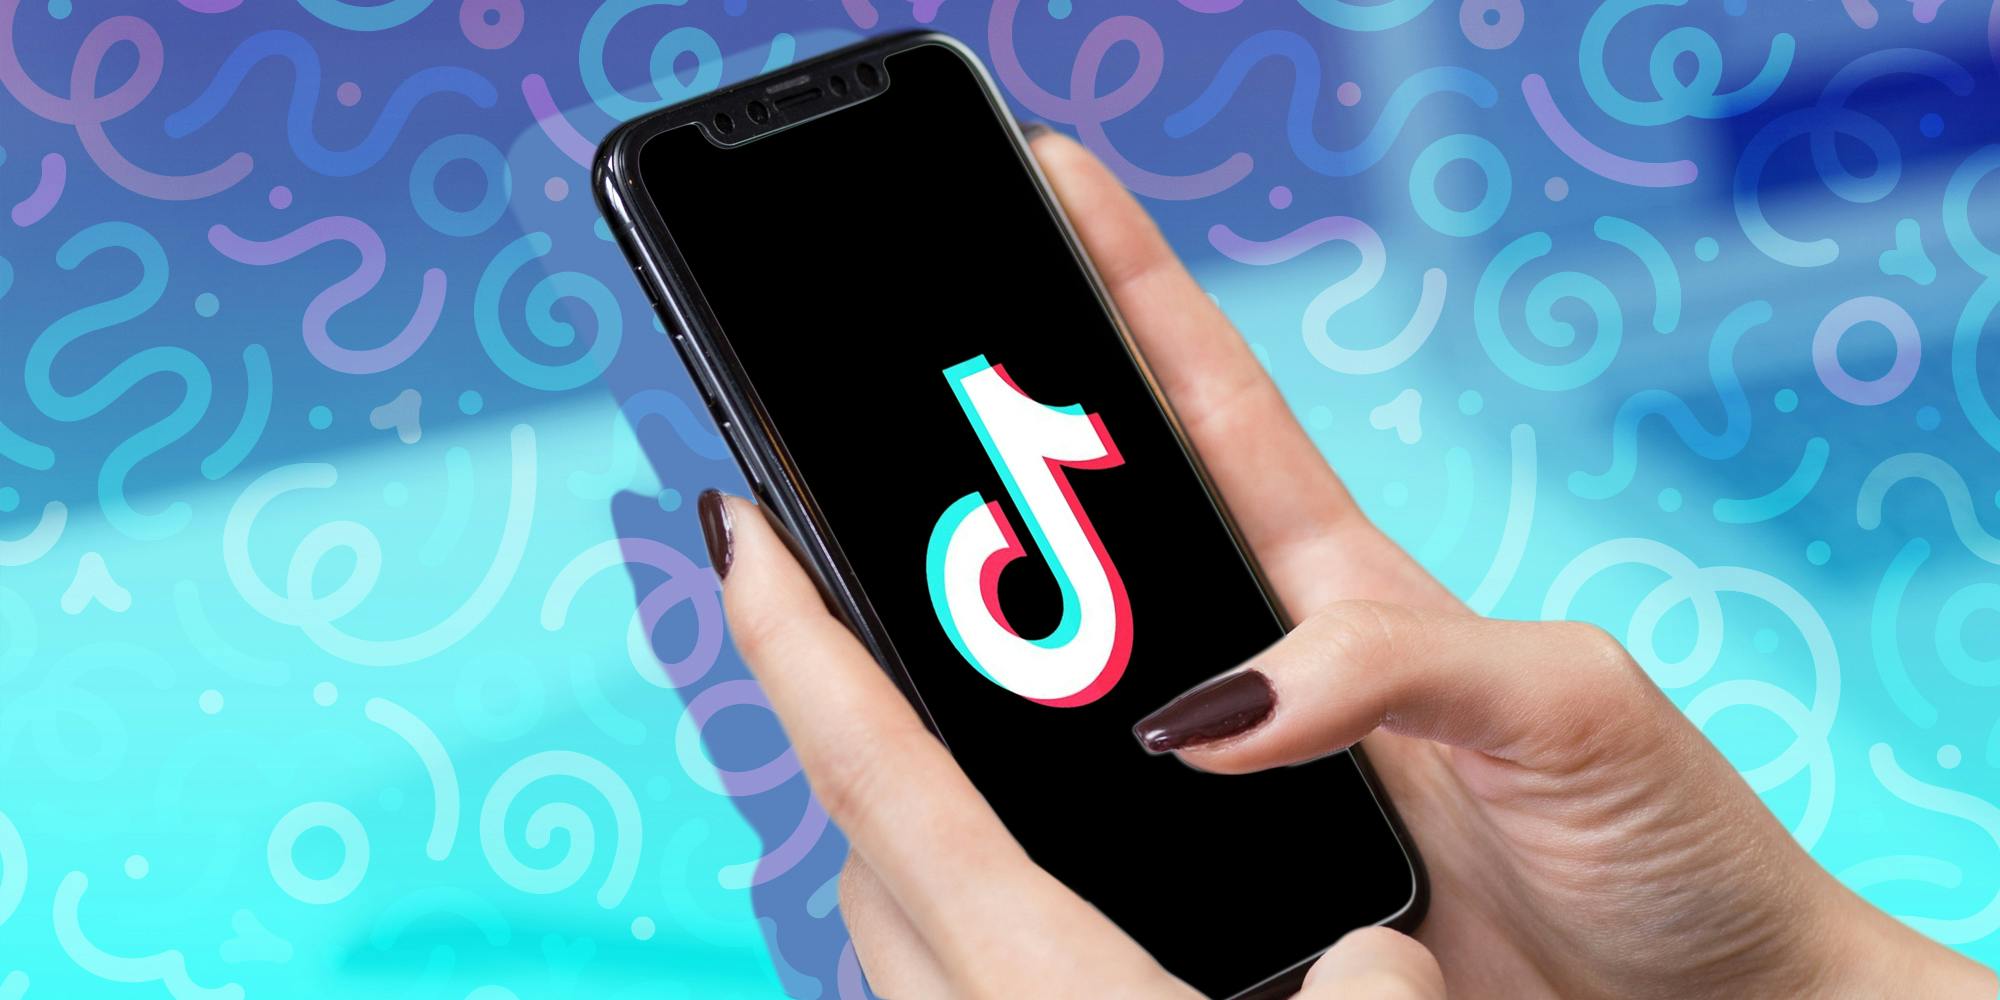 TikTok 101: How to Use Filters and Effects to Make Your Videos Pop